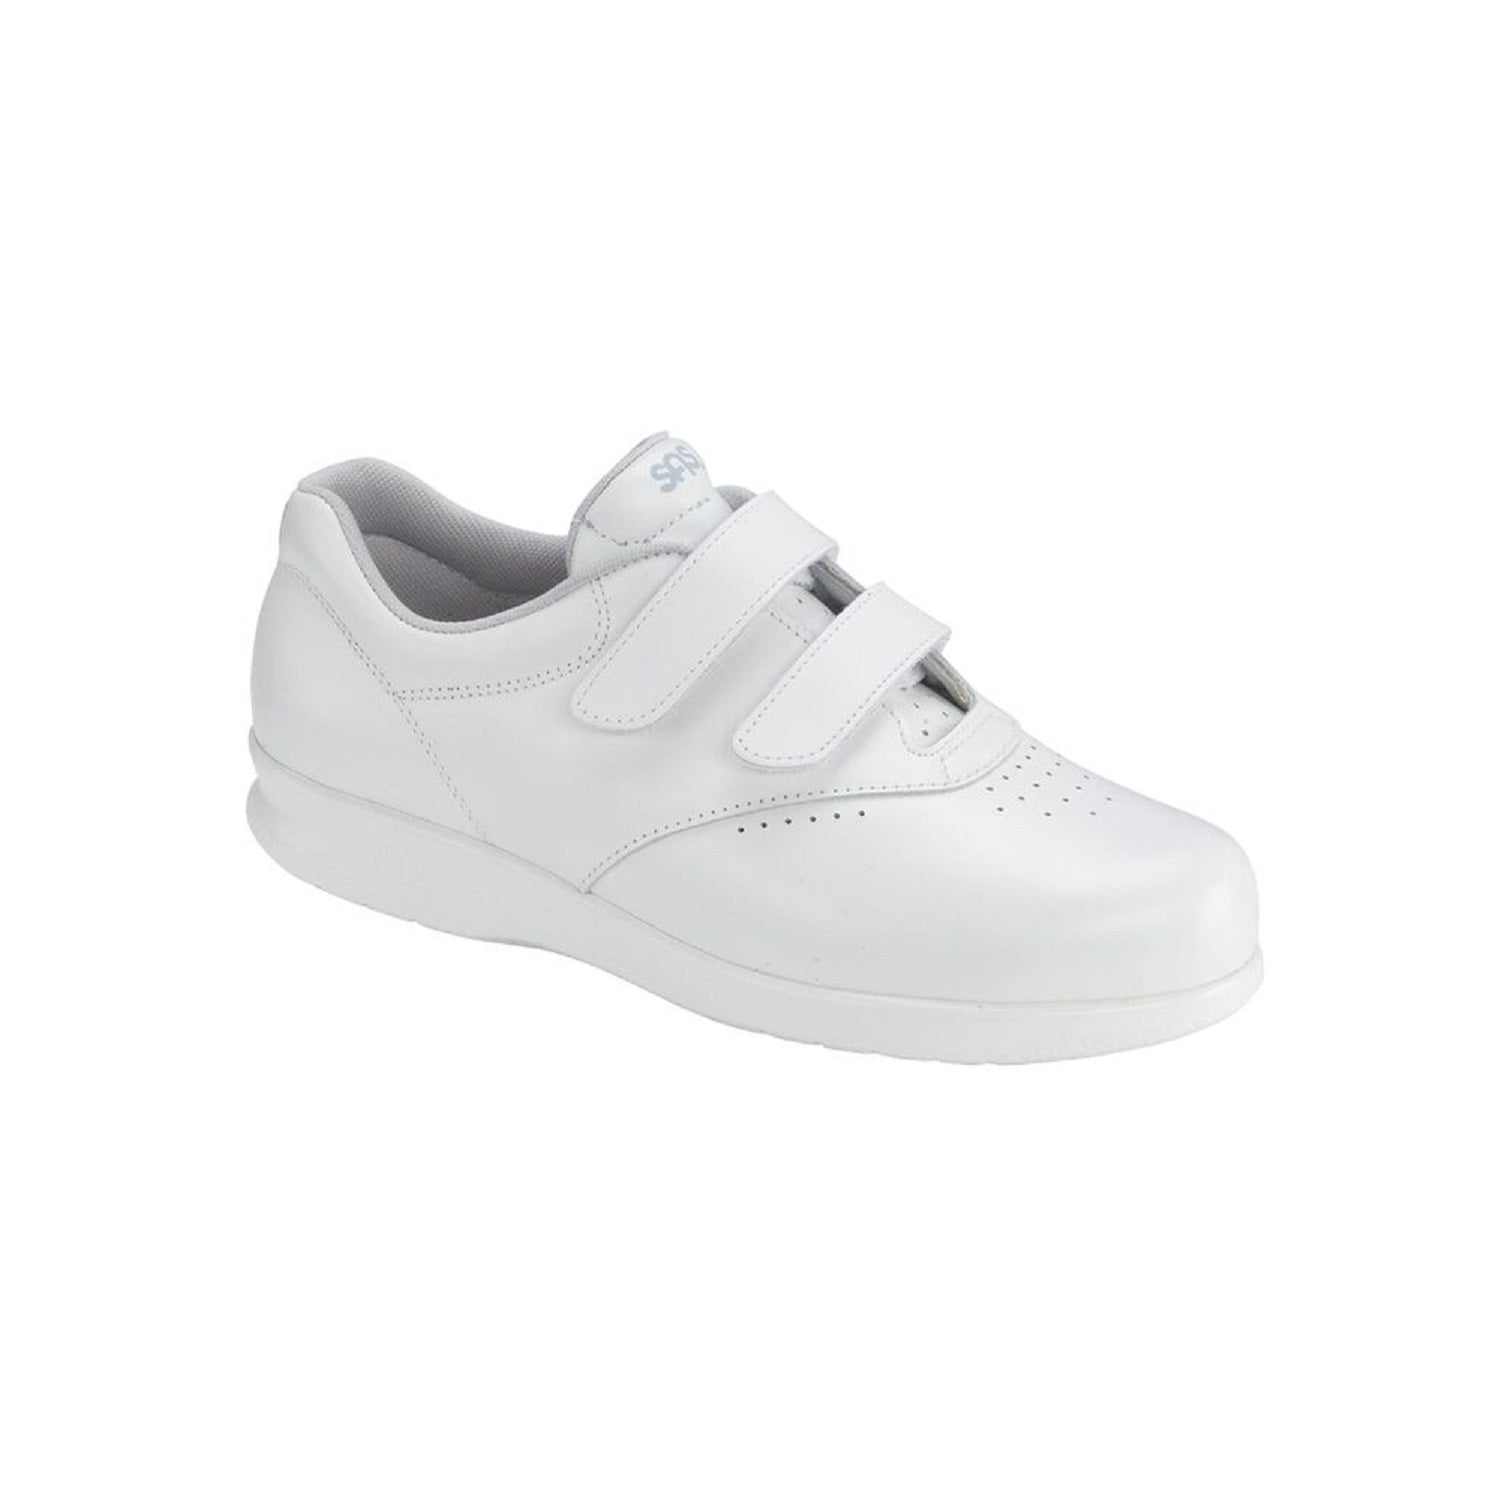 White leather walking shoe with two velcro straps.